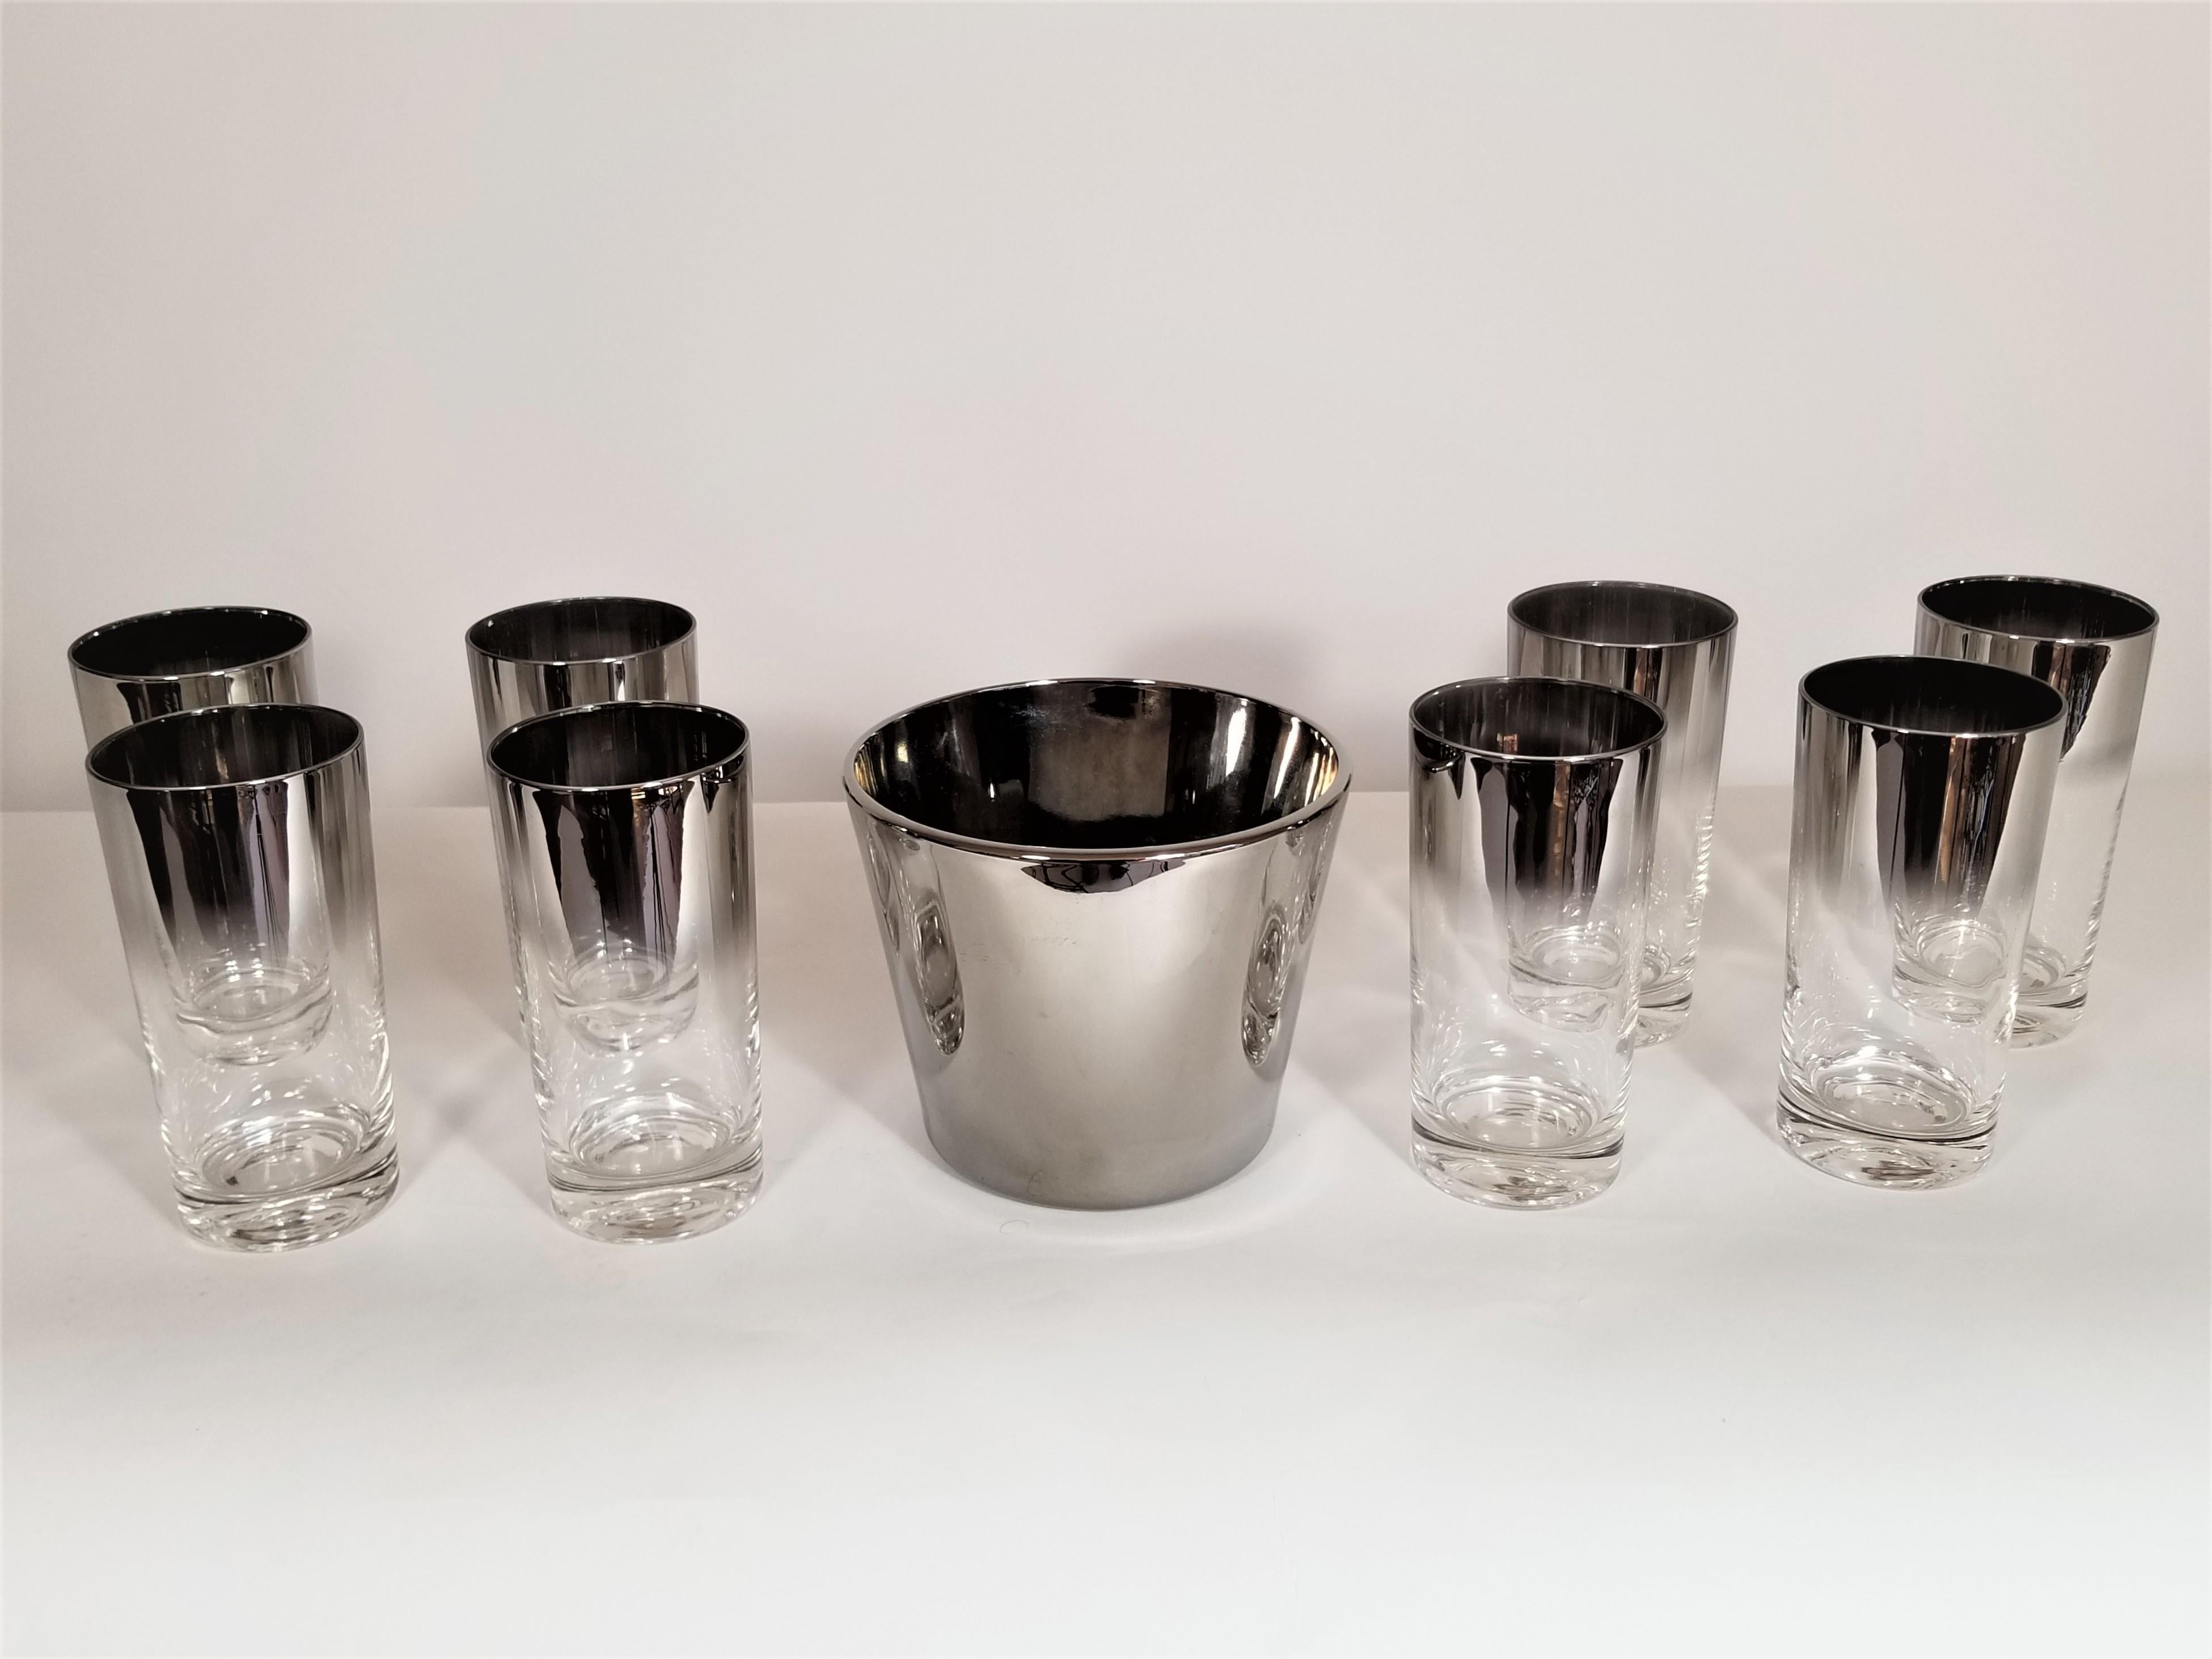 Midcentury 1960s set of 8 Dorothy Thorpe glasses with ice bucket
Excellent condition

Measurements for ice bucket
Height 4.88 inches
Diameter 5.88 inches

Measurements glasses
Height 5.63 inches
Diameter 2.75 inches.